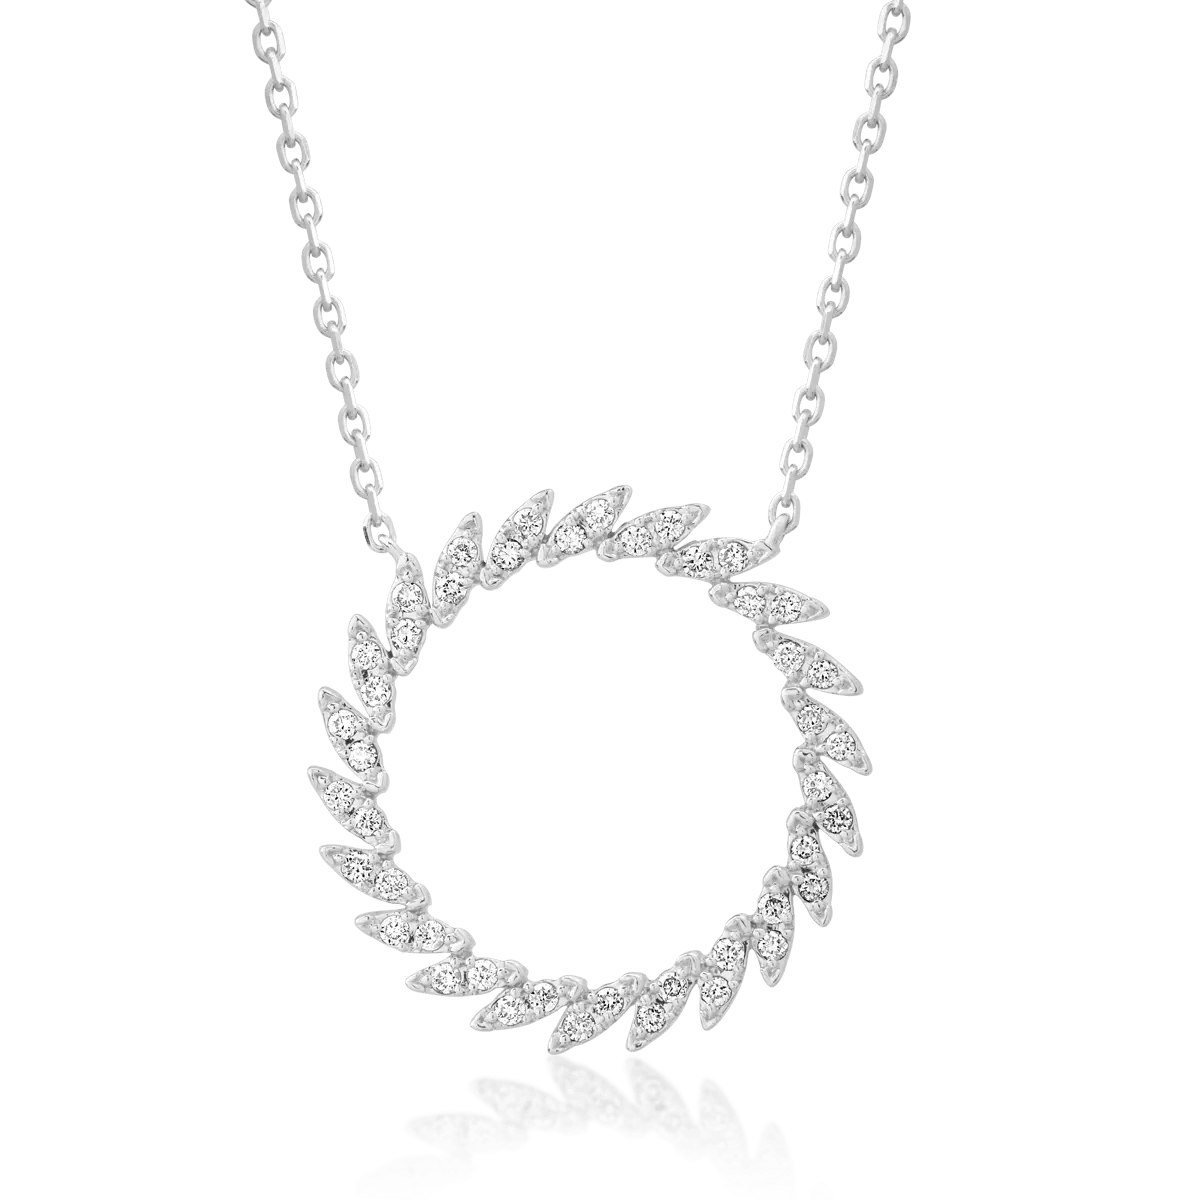 14K white gold necklace with diamonds of 0.21ct